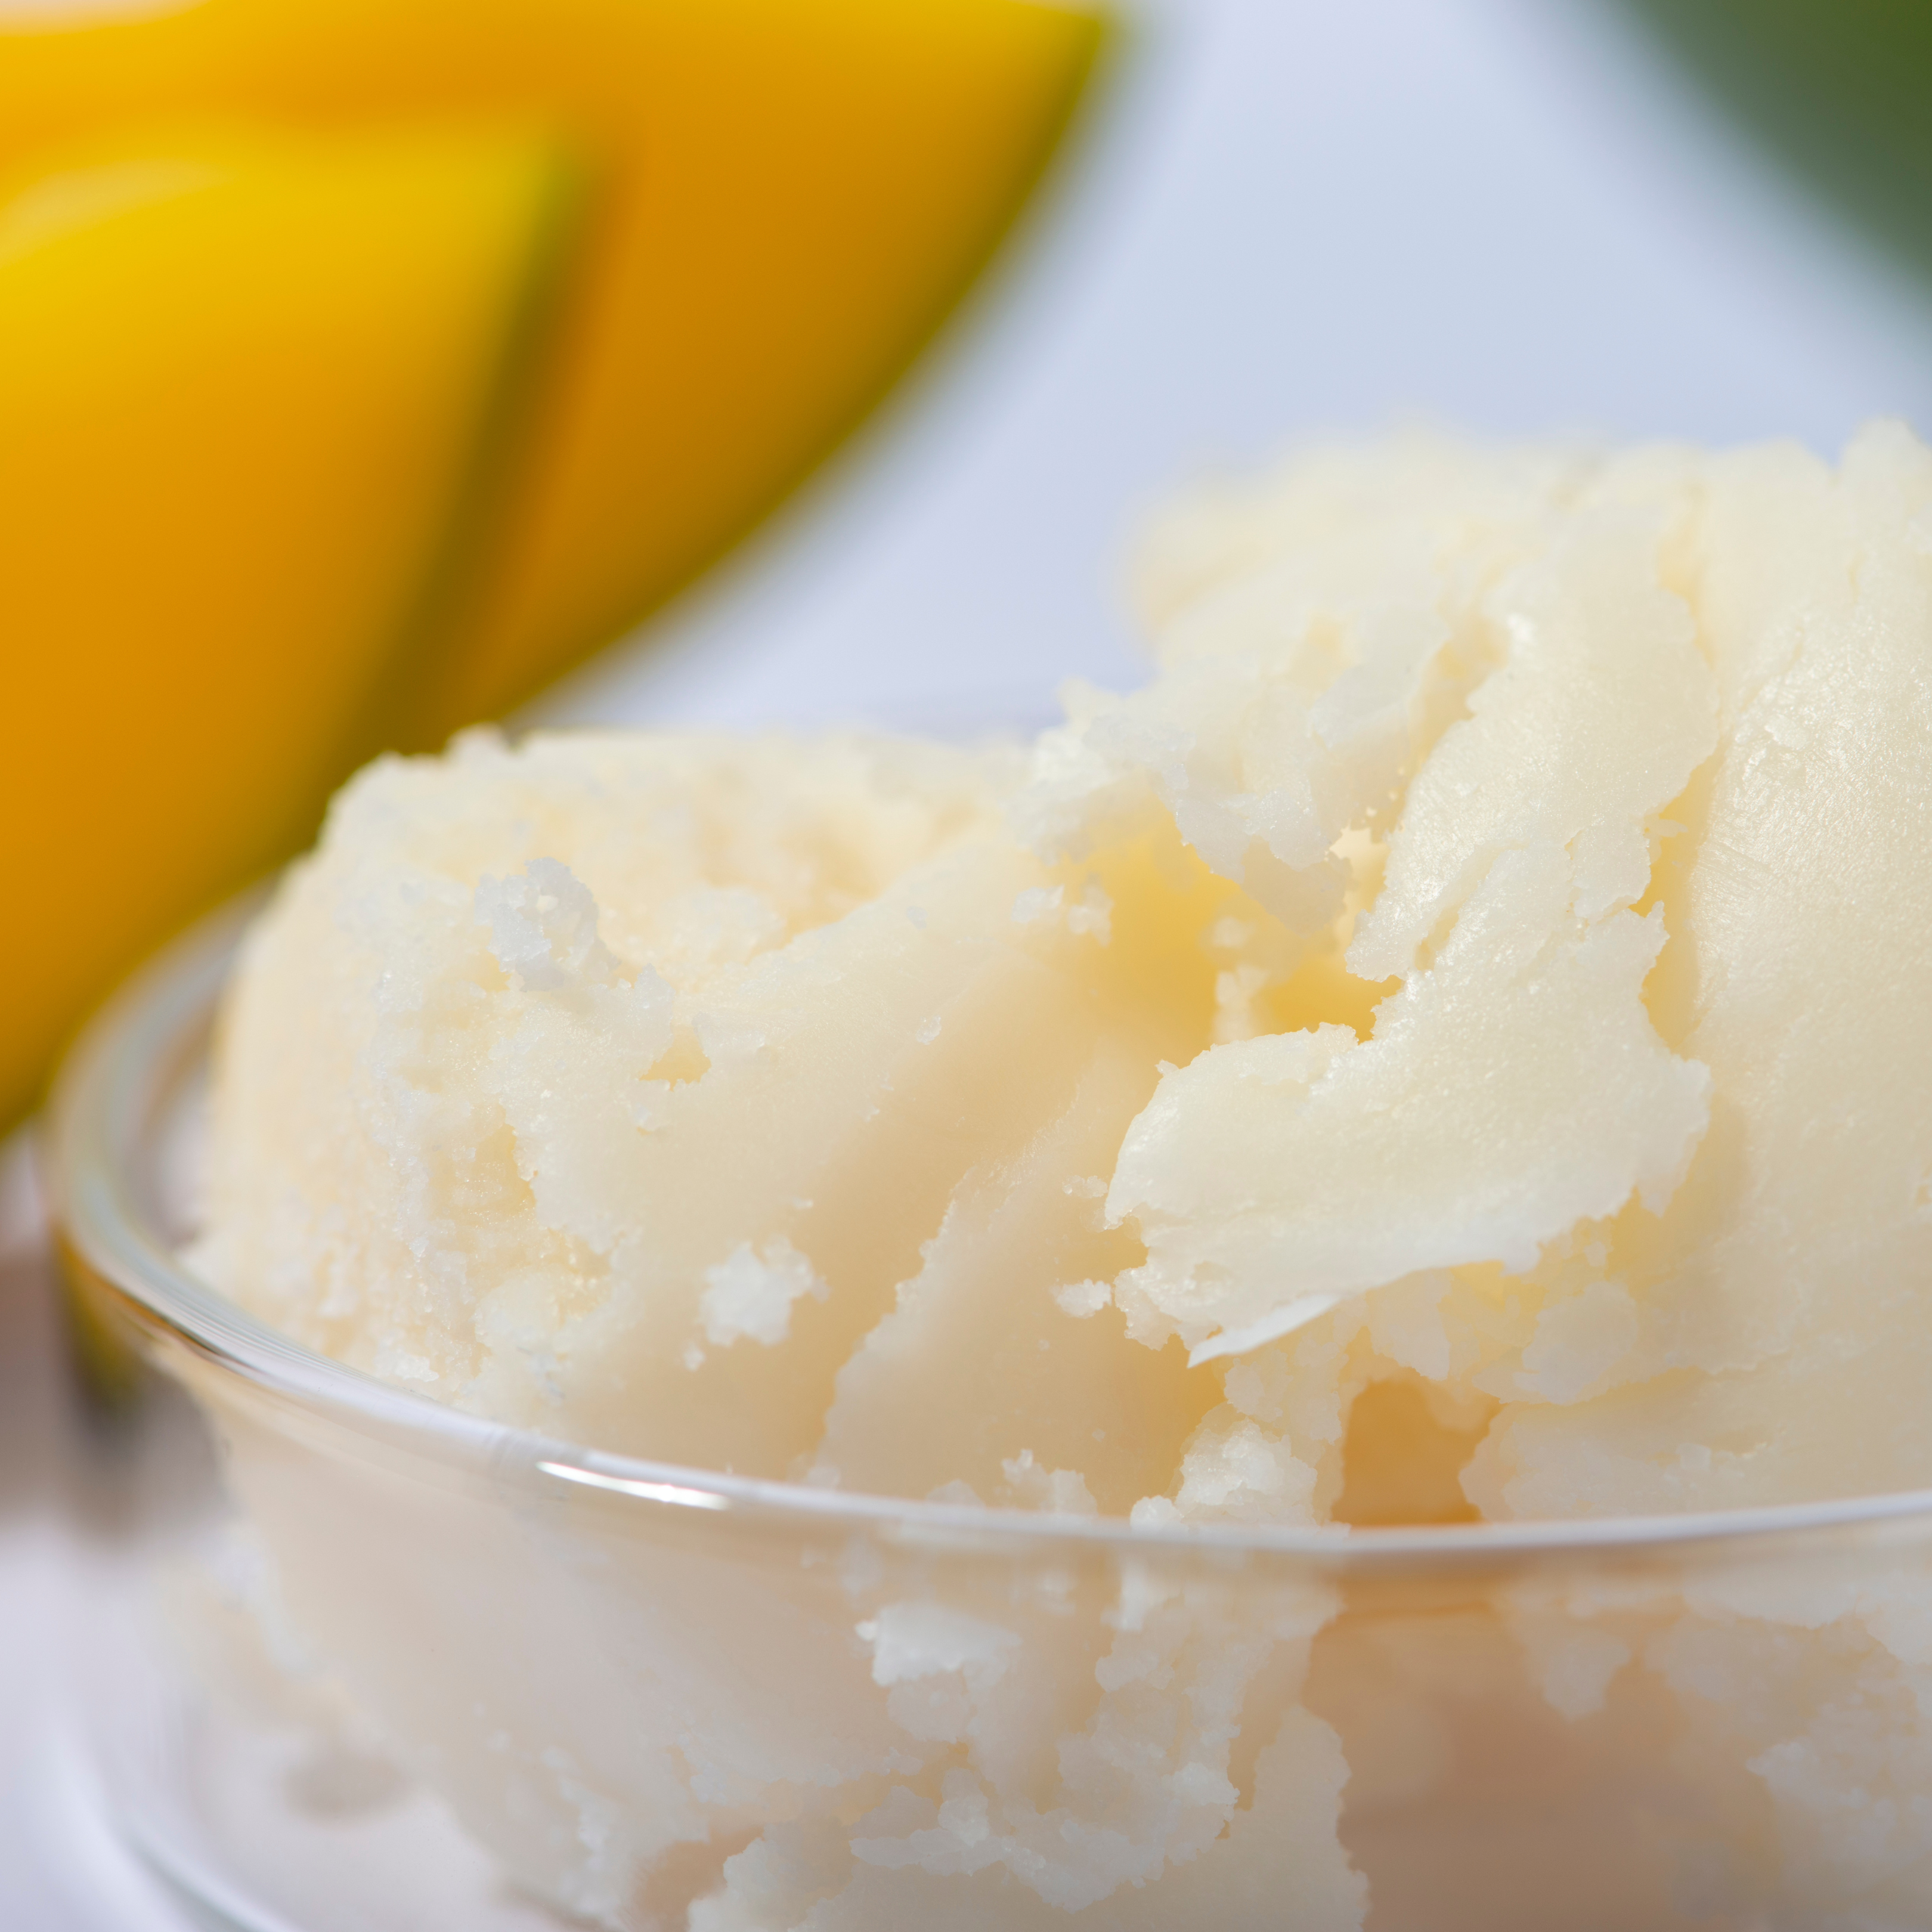 What is Mango Butter & what are the benefits of using it on my beard?